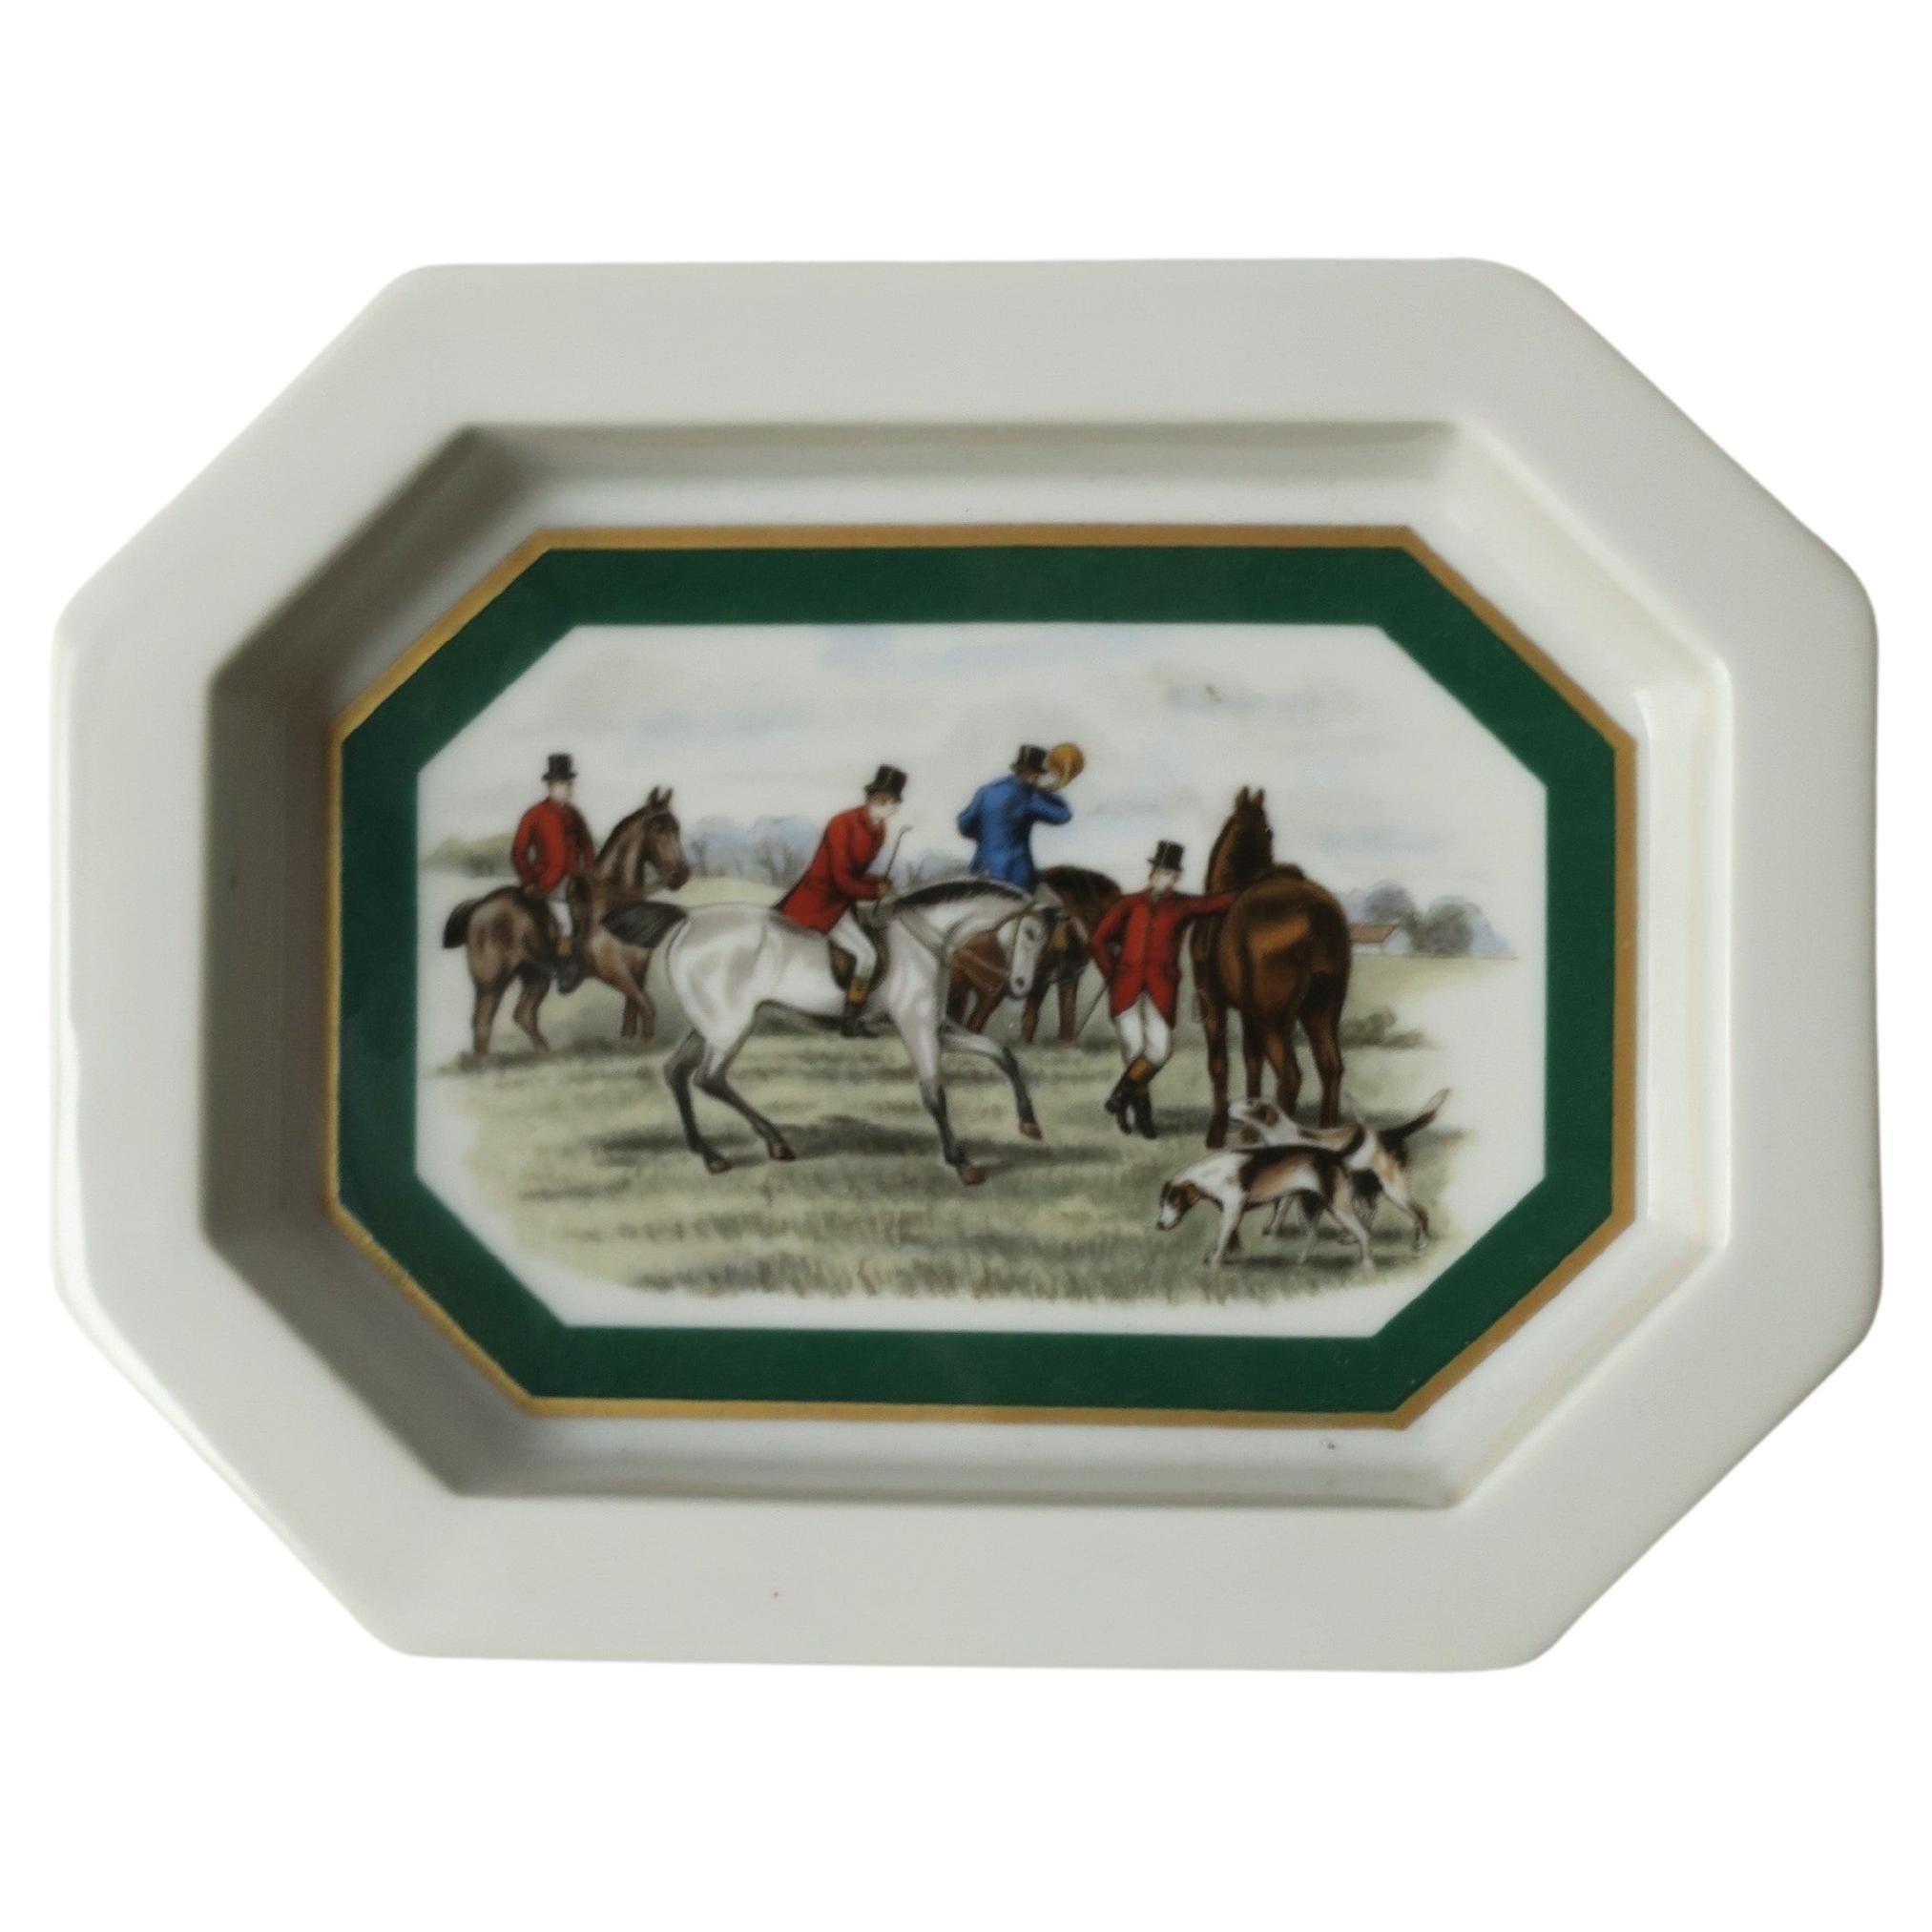 Porcelain Jewelry Dish with Equestrian Horse Scene